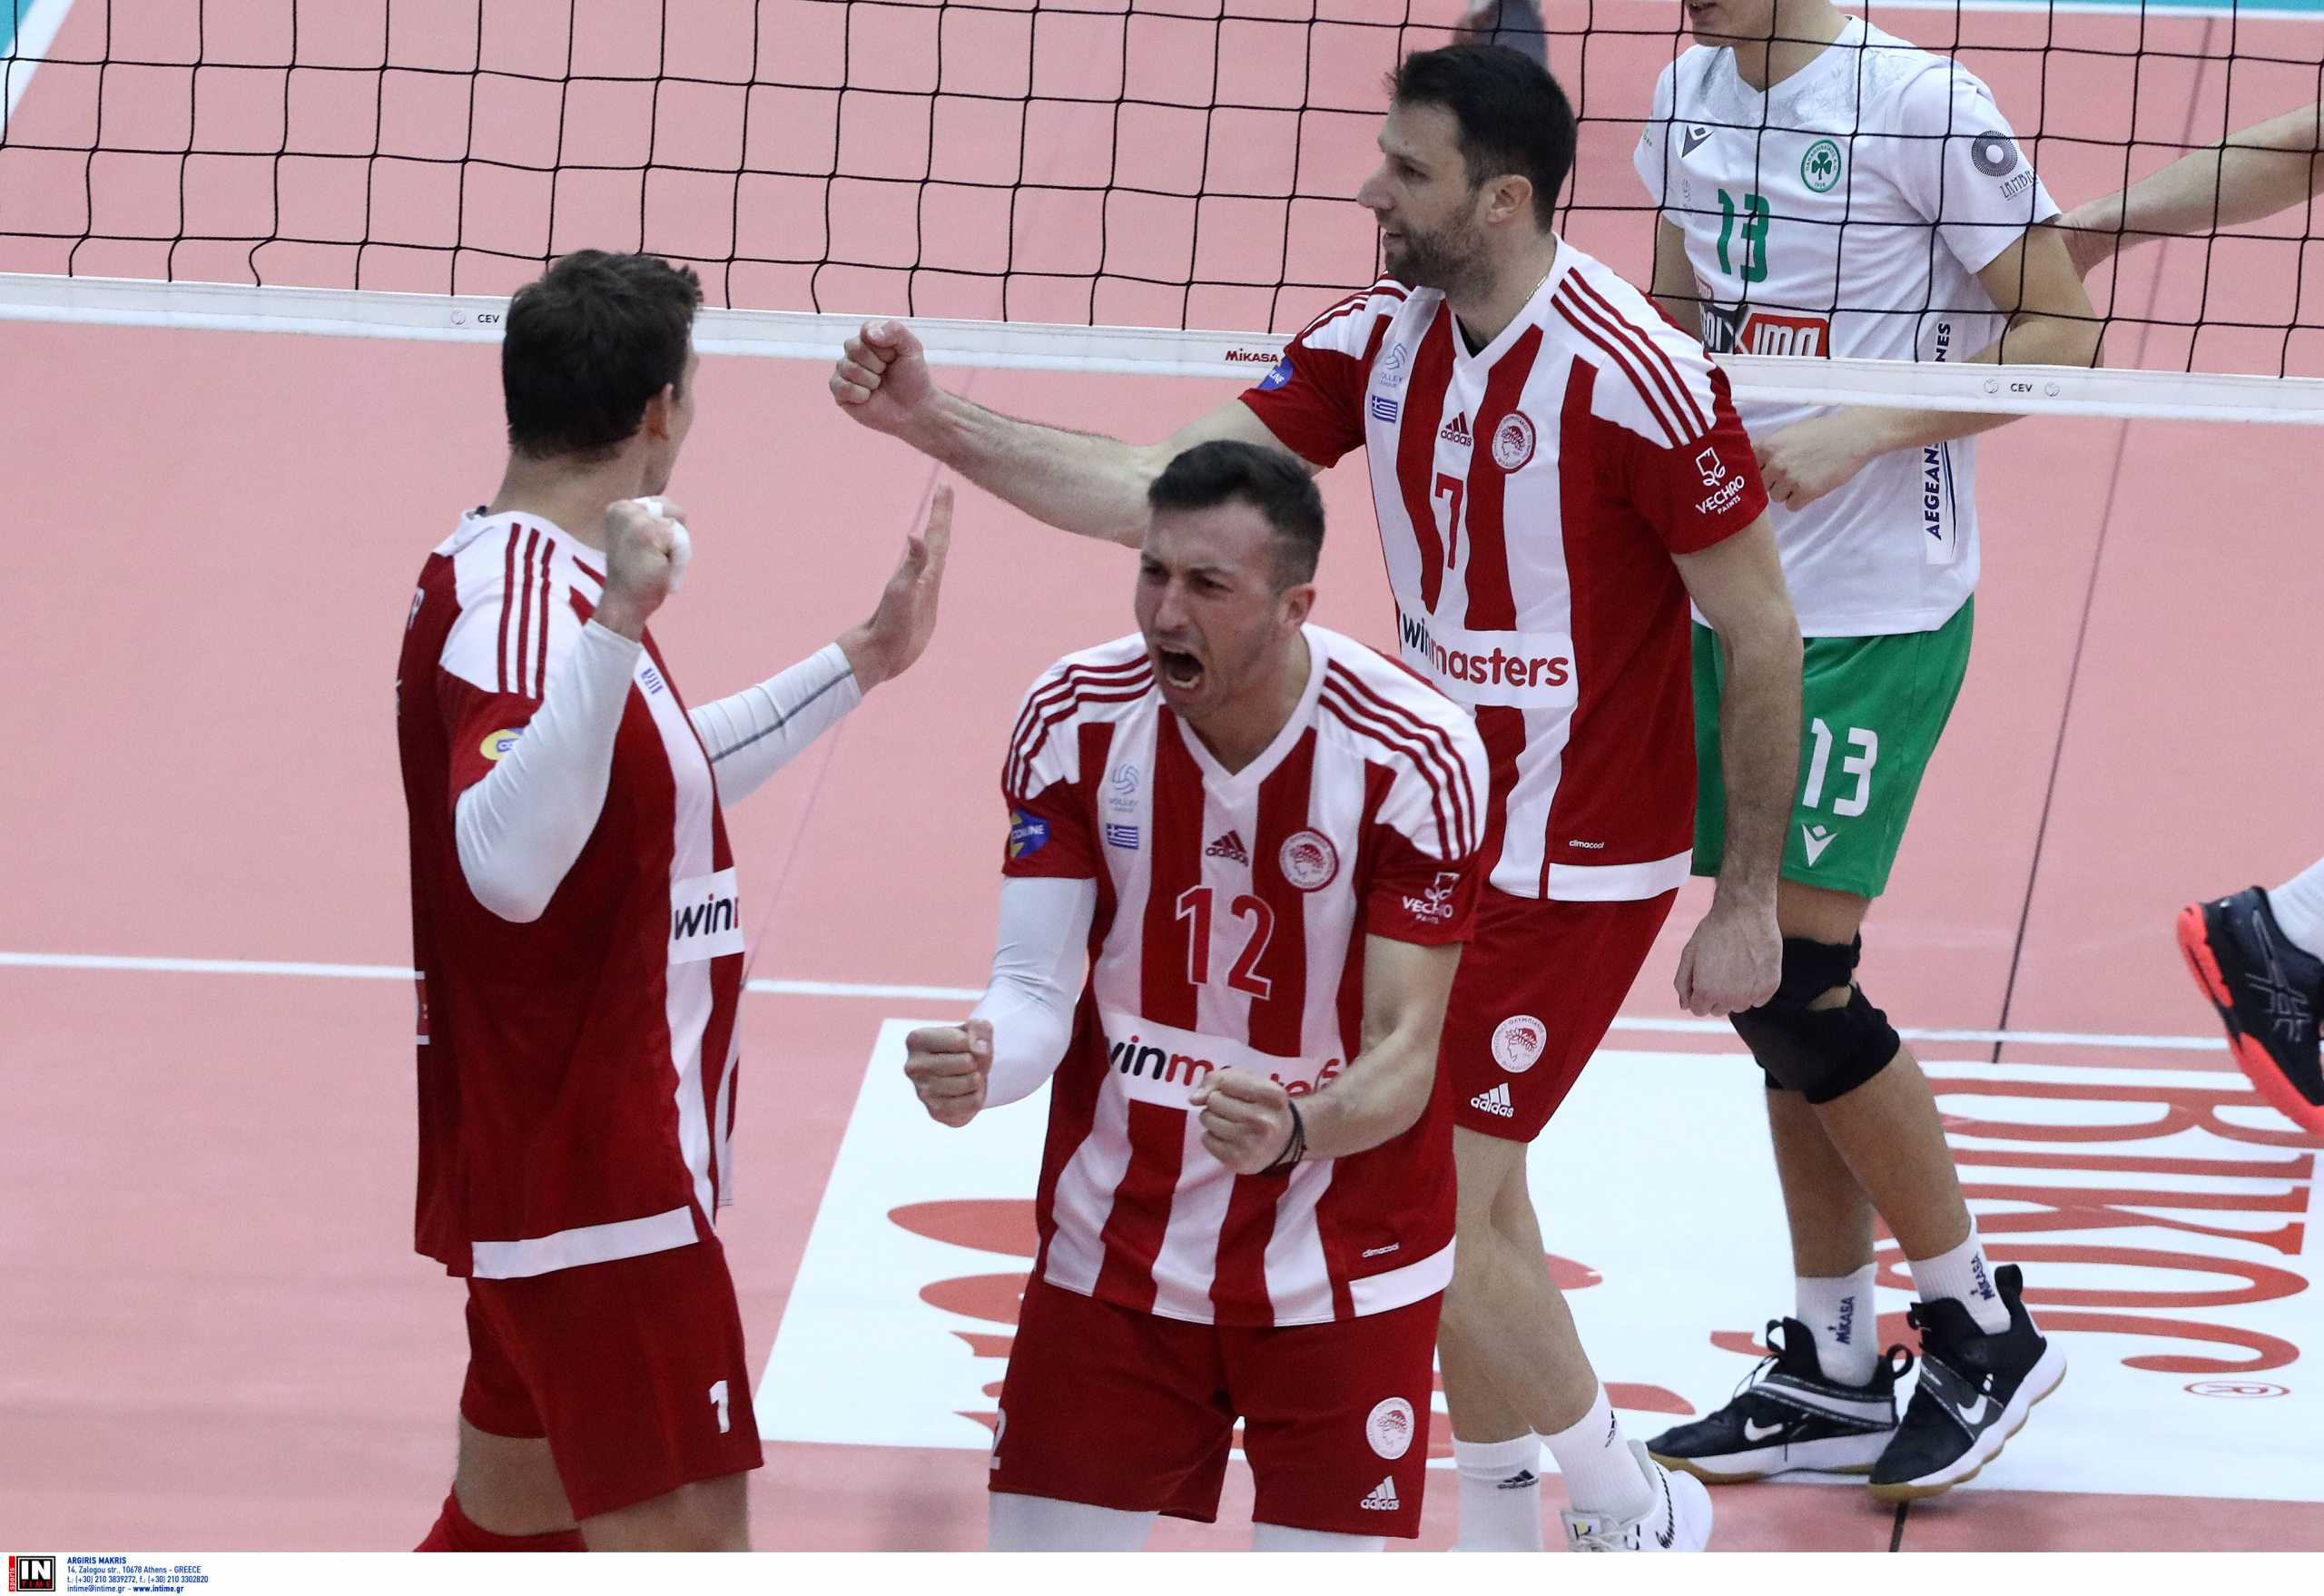 Volley League: Ο Ολυμπιακός «έσπασε» το σερί και «υπέταξε» τον Παναθηναϊκό (video)